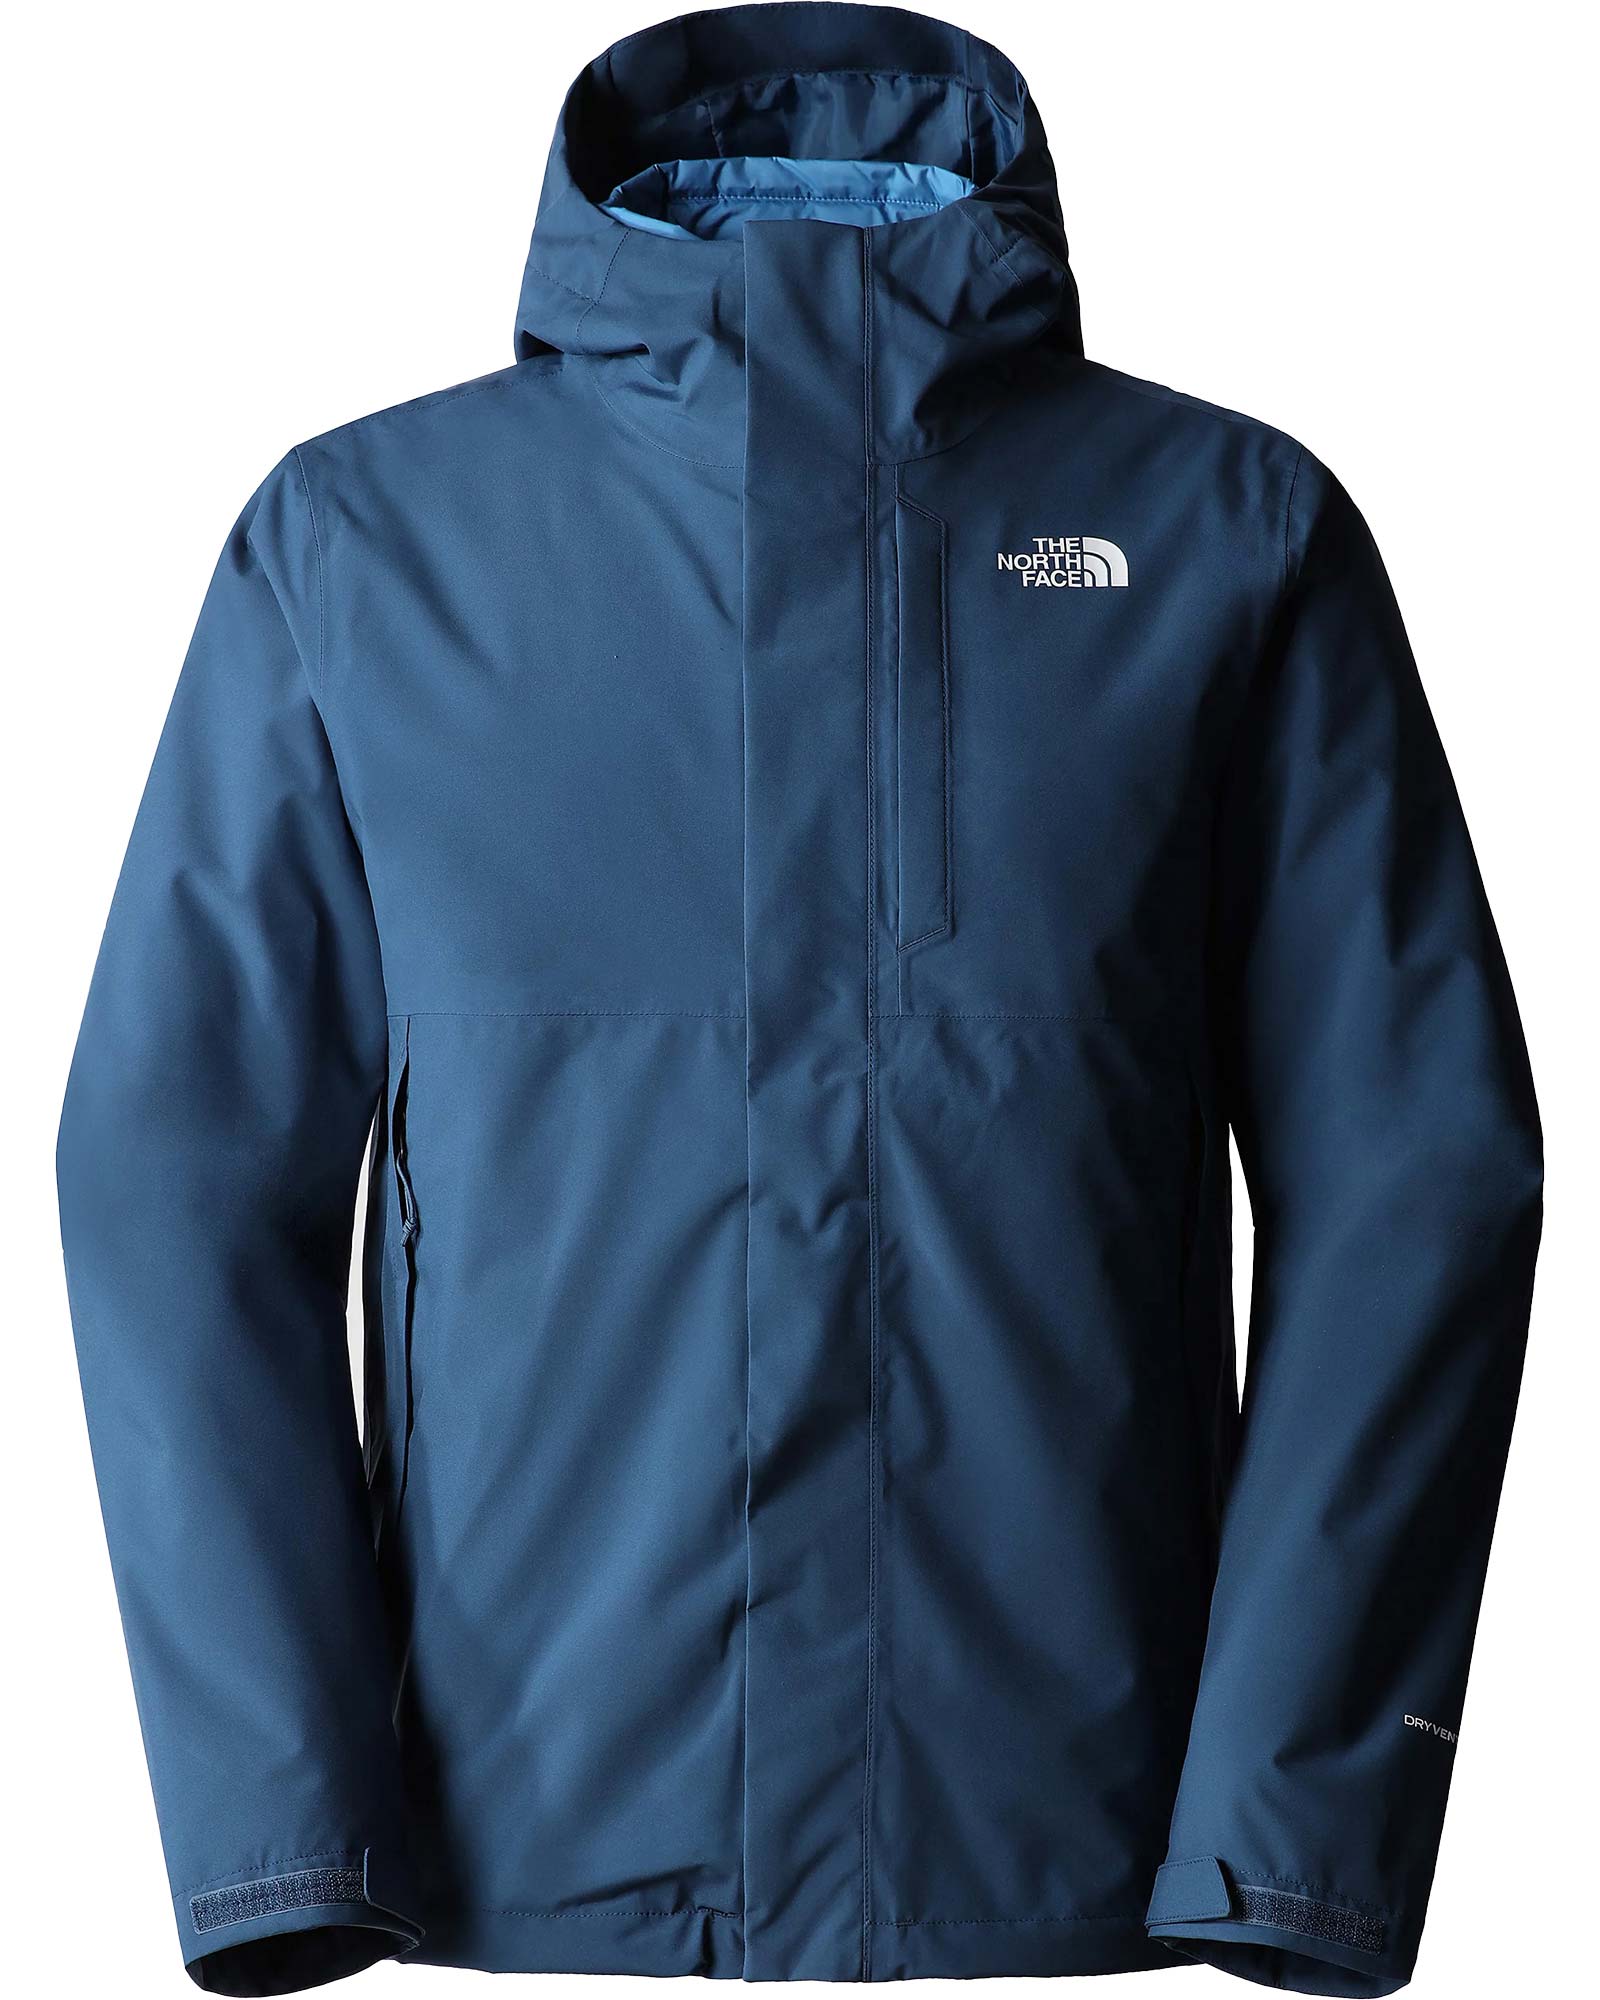 The North Face Carto Men’s Triclimate Jacket - Shady Blue-Federal Blue S